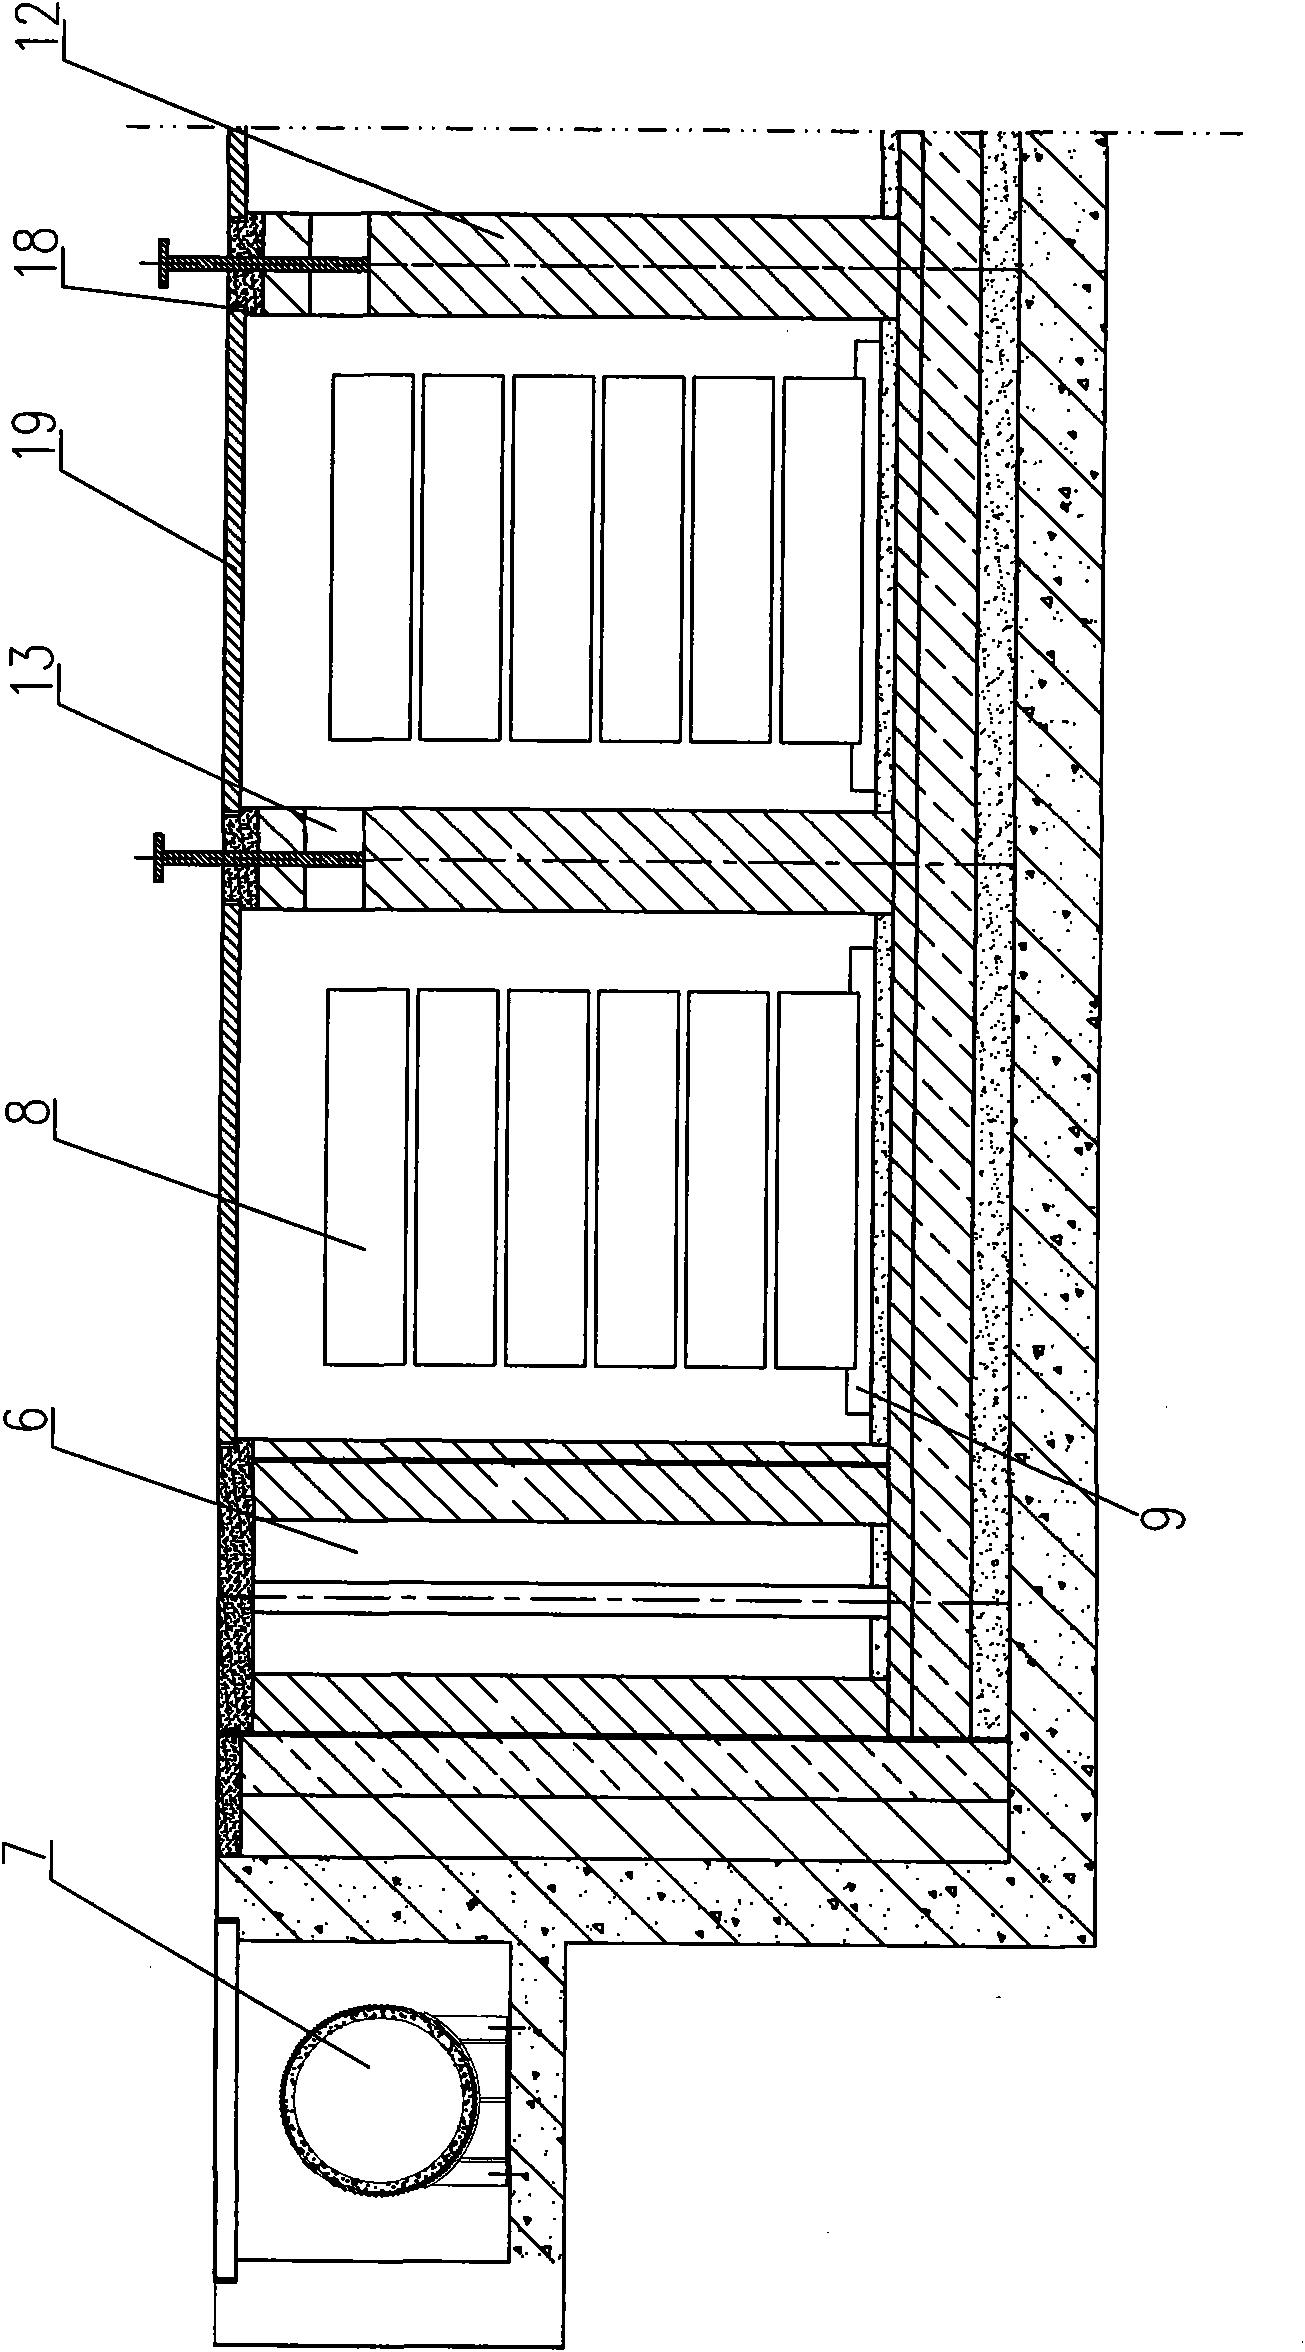 Secondary roasting furnace for carbon products and roasting method of secondary roasting furnace